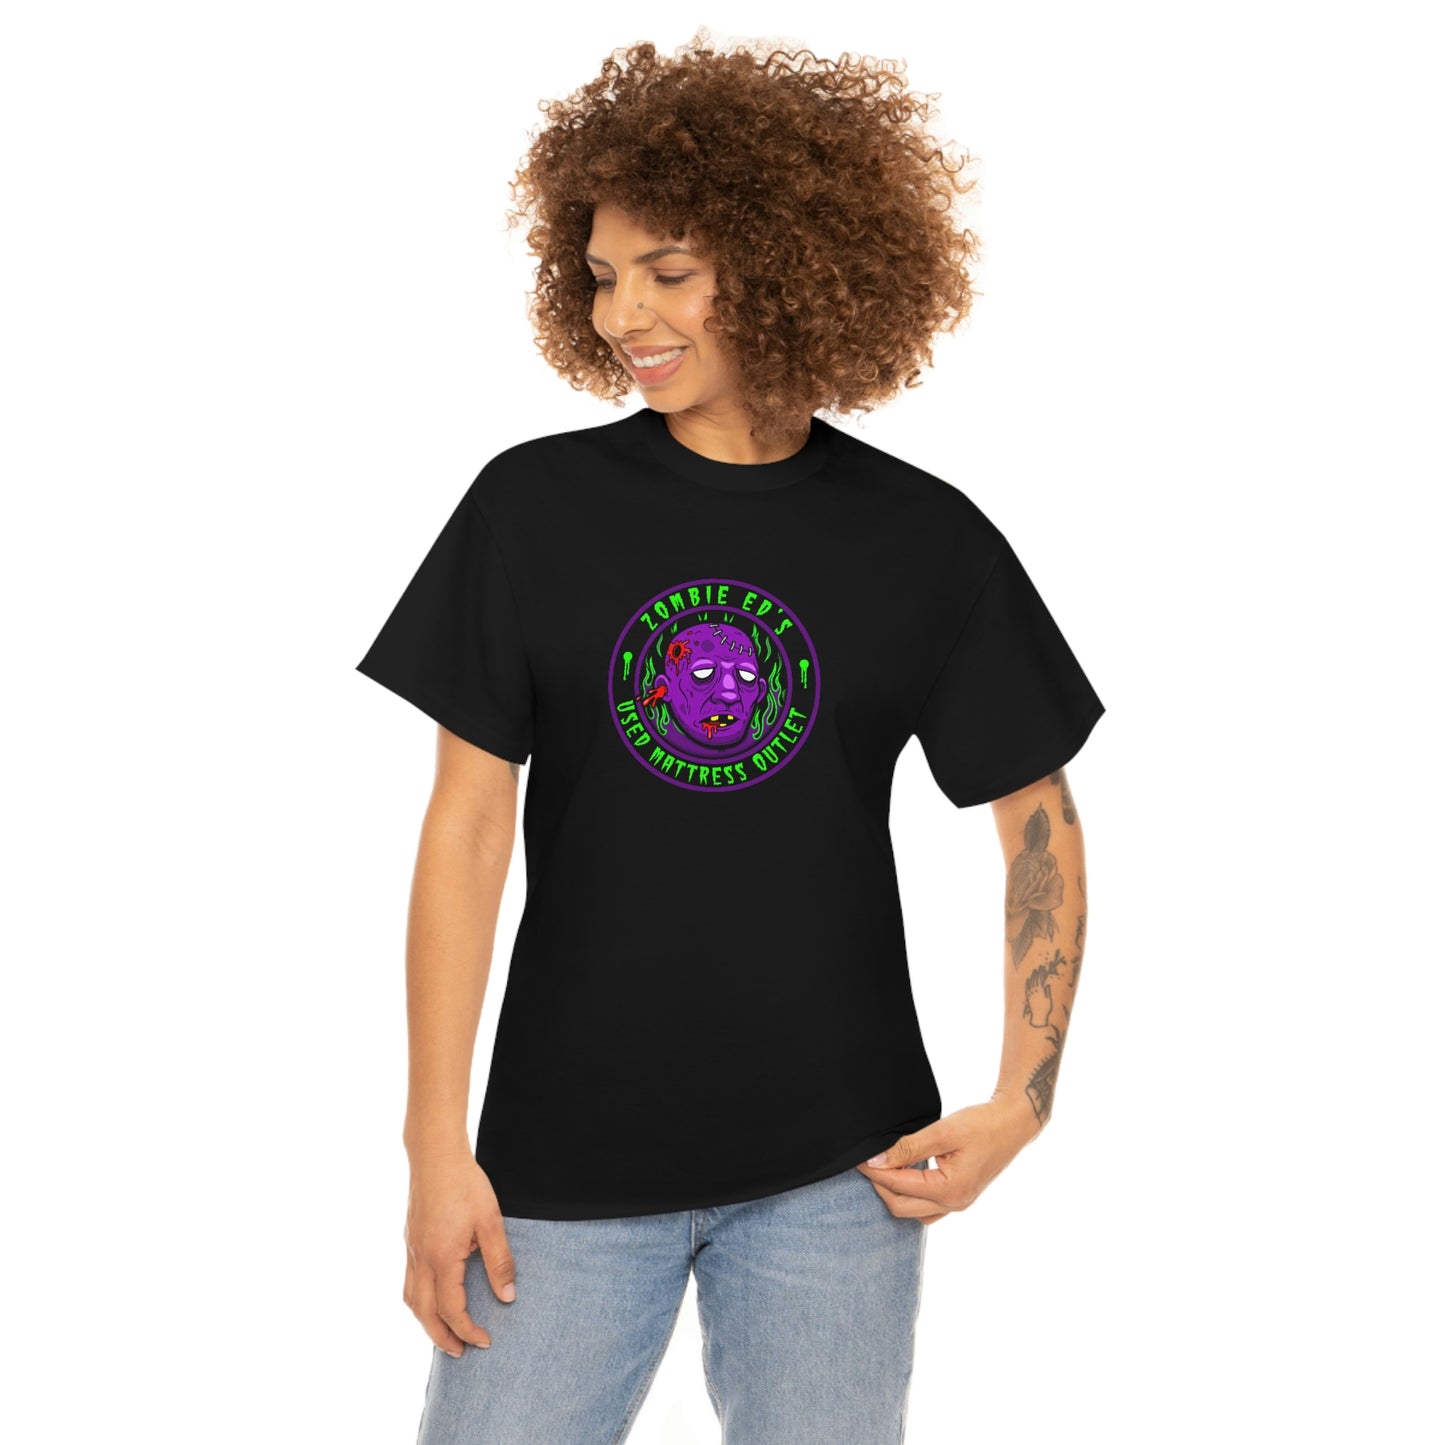 ZOMBIE ED'S - USED MATTRESS OUTLET Unisex Heavy Cotton Tee